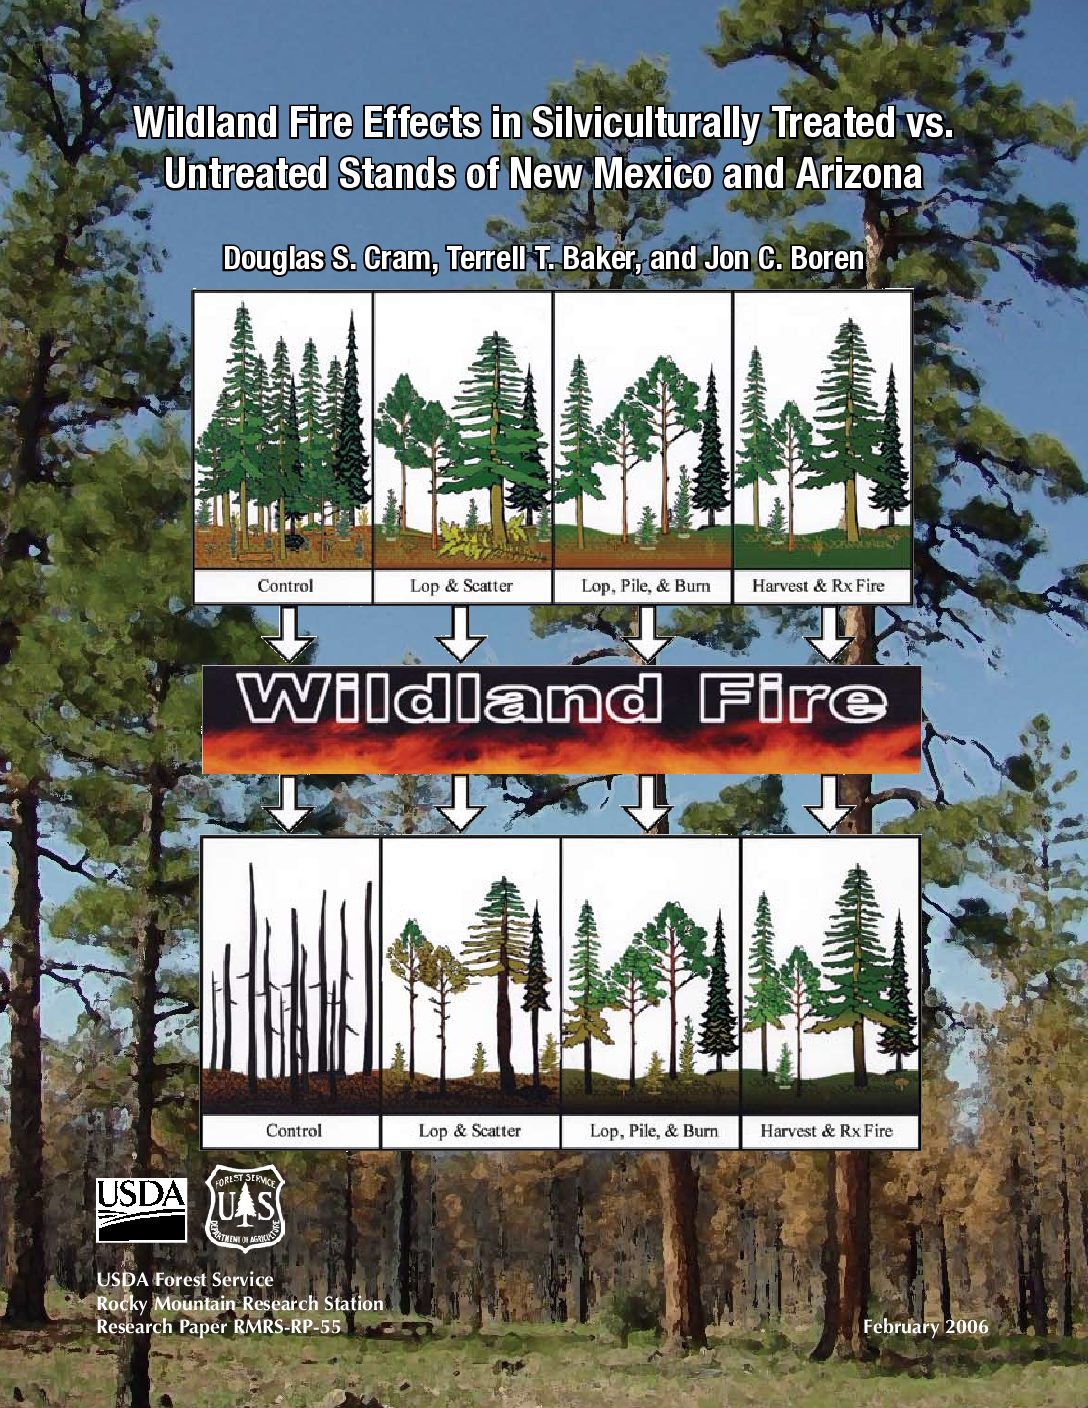 Wildland Fire Effects in Silviculturally Treated vs. Untreated Stands of New Mexico and Arizona